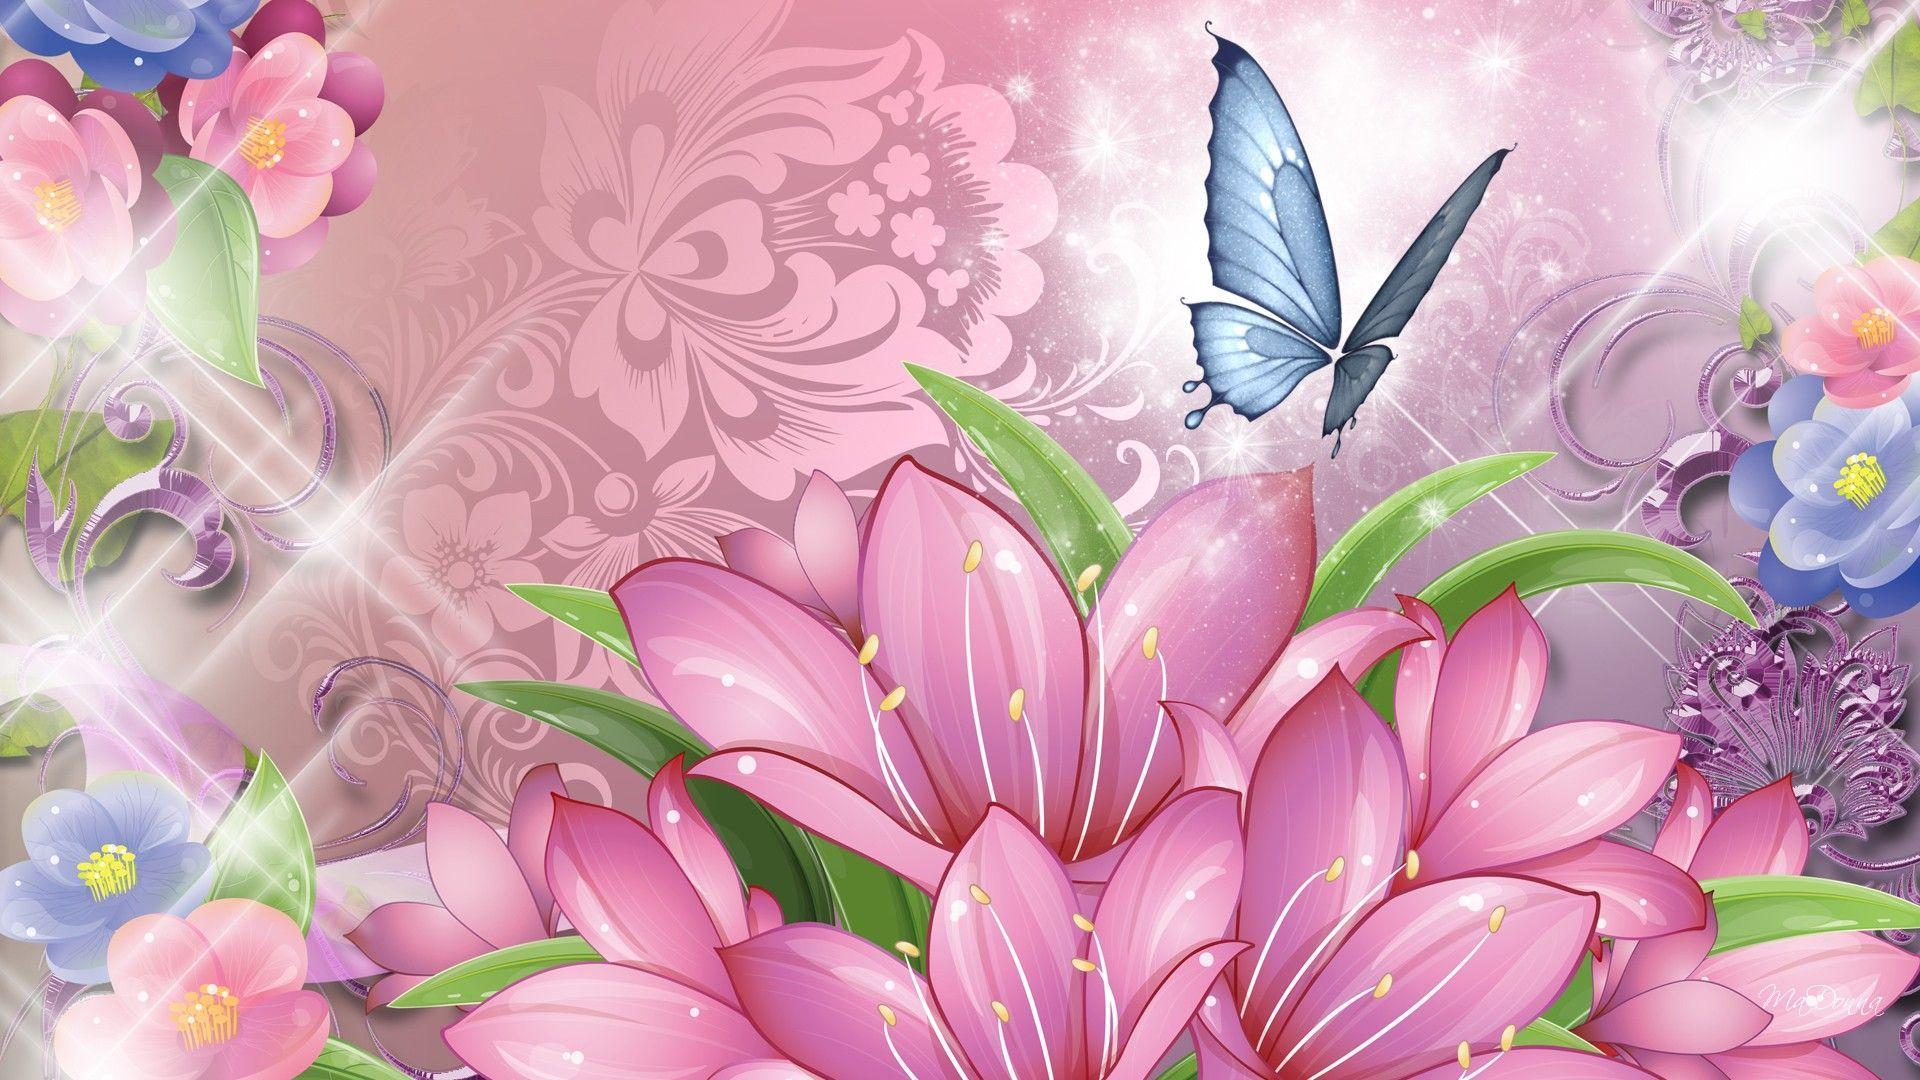 Blue Butterfly and Pink Flowers Wallpaper HD. image from pin it